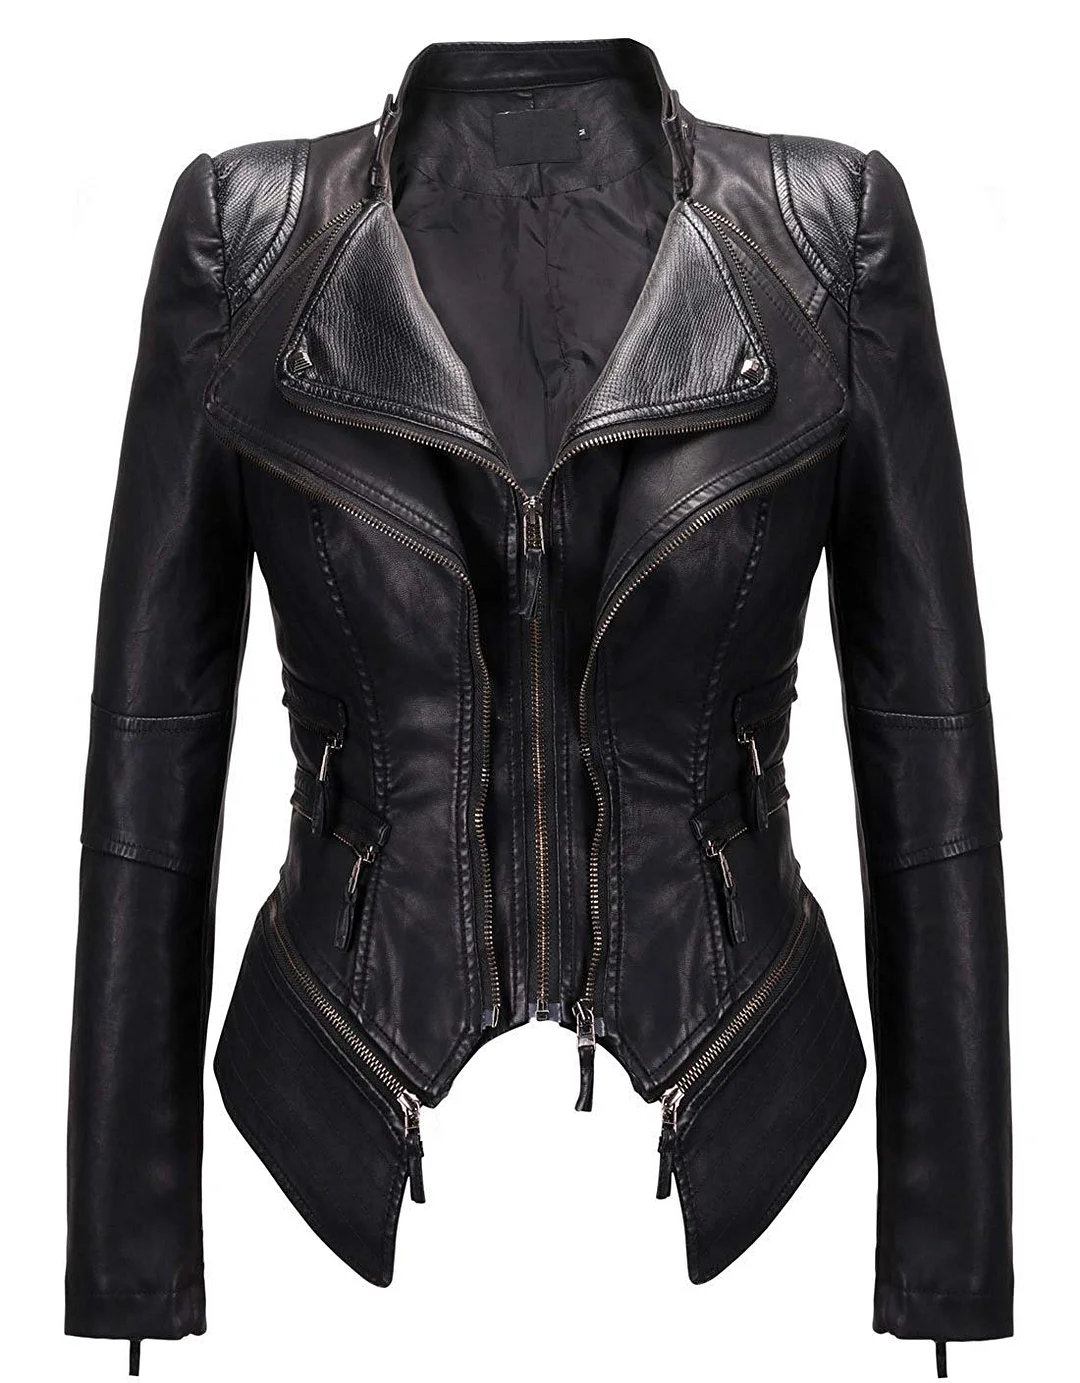 Women's Fashion Studded Perfectly Shaping Faux Leather Biker Jacket